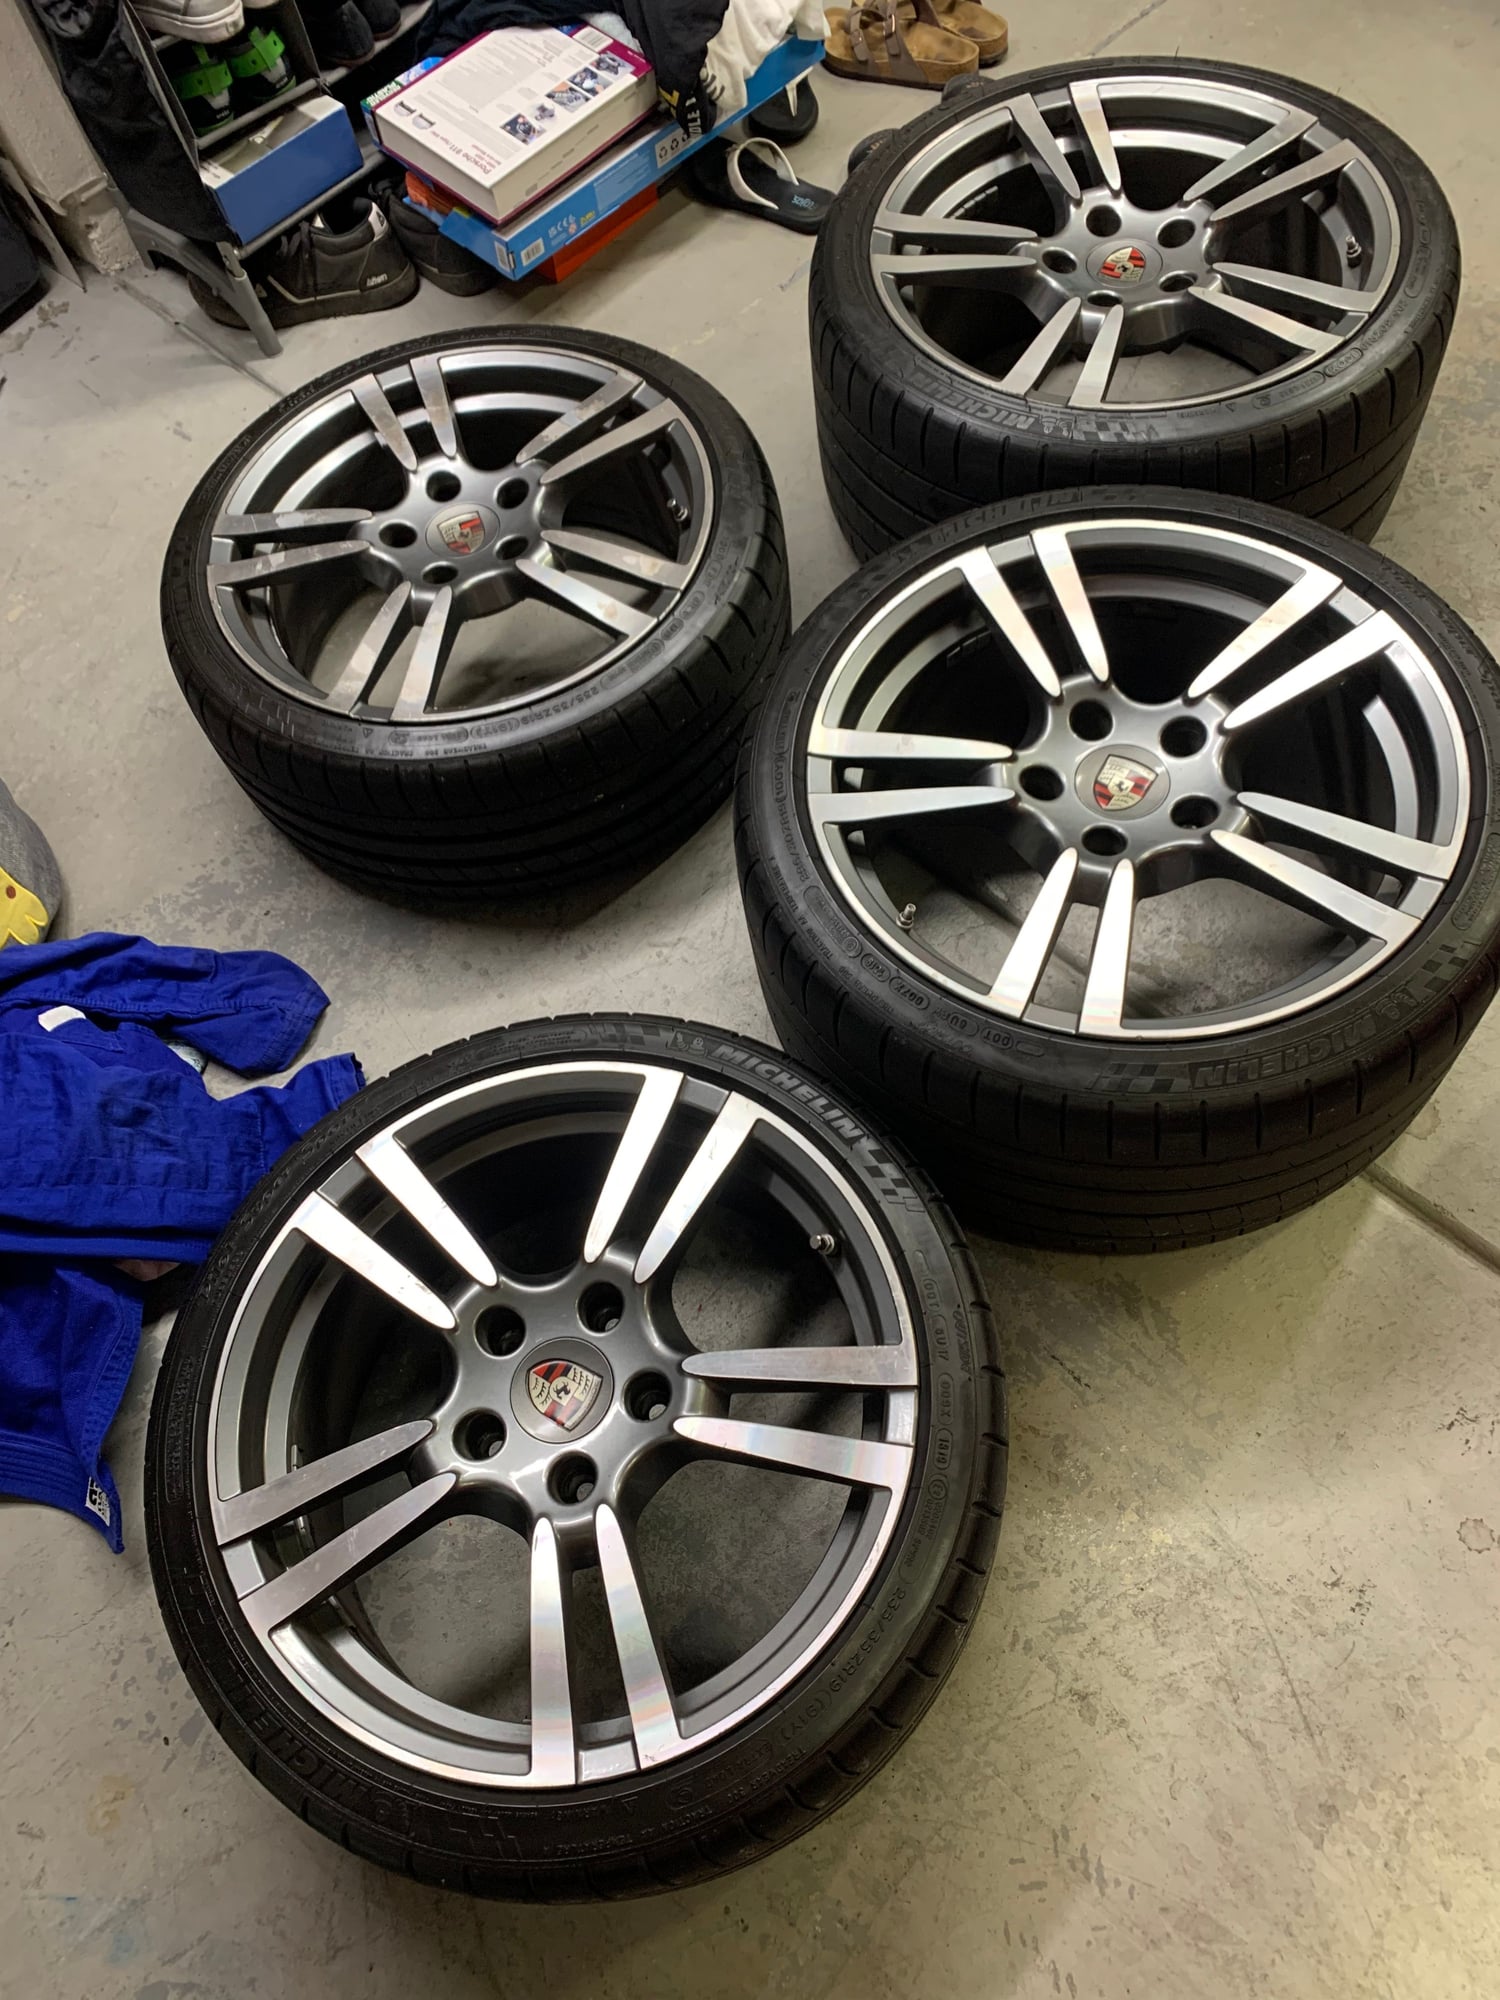 Wheels and Tires/Axles - 997 turbo II wheels n tires - Used - 2002 to 2010 Porsche 911 - San Diego, CA 92111, United States